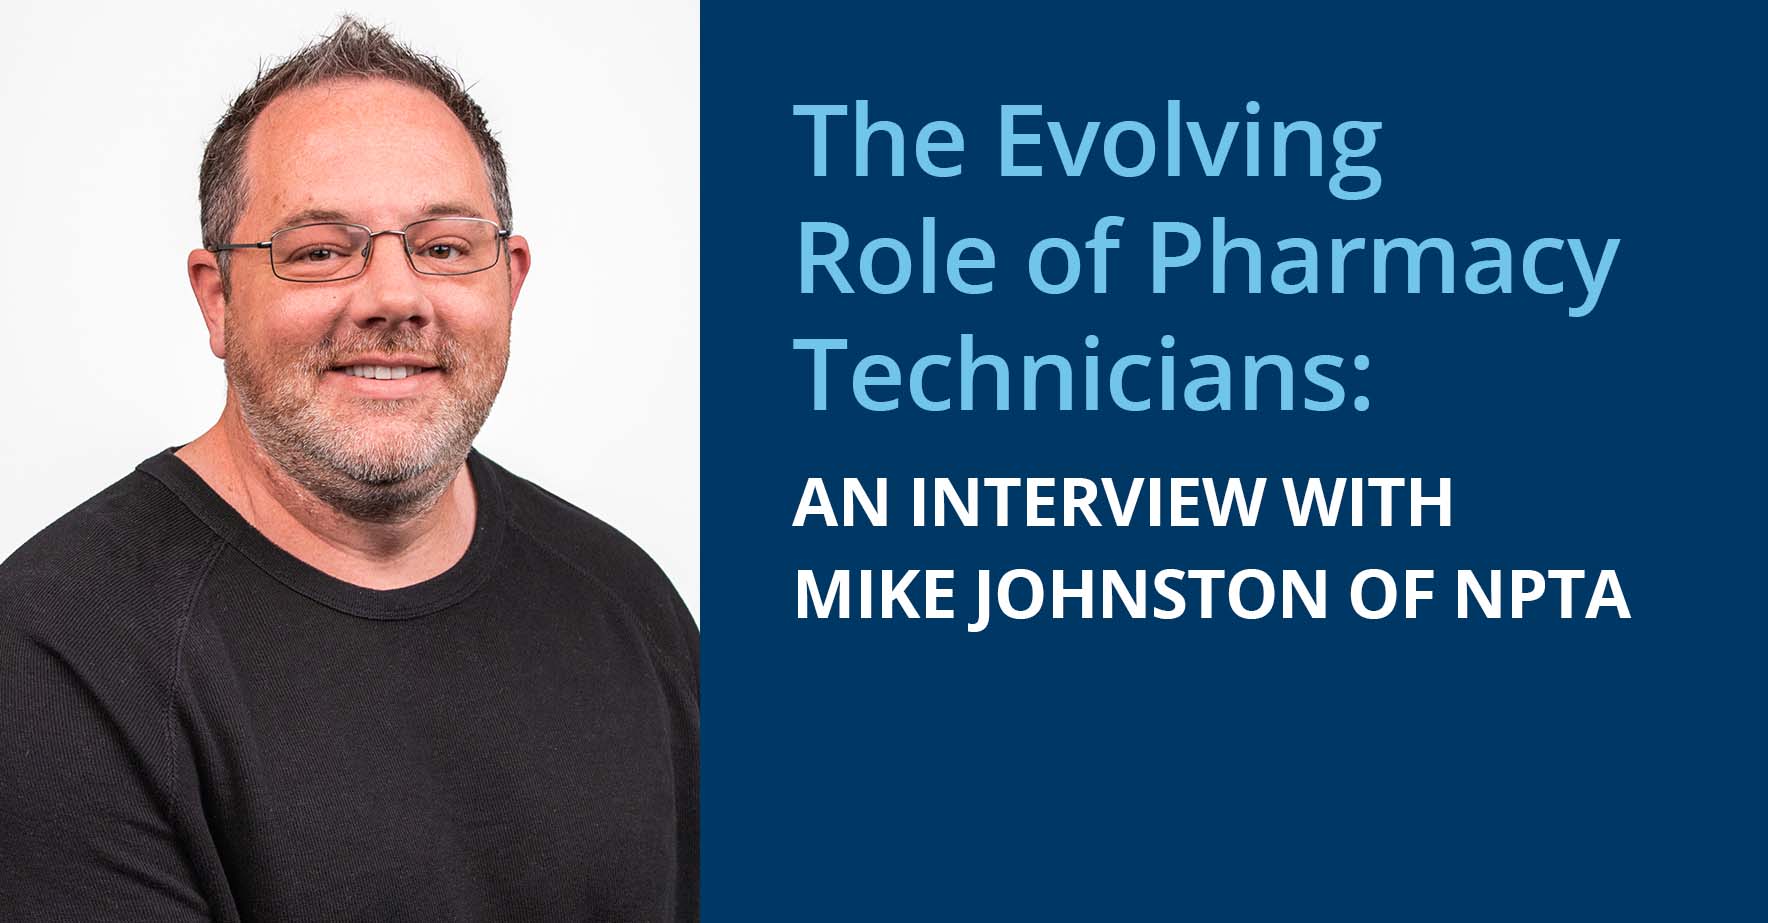 The_Evolving_Role_of_Pharmacy_Technicians_An_Interview_With_Mike_Johnston_of_NPTA.jpg